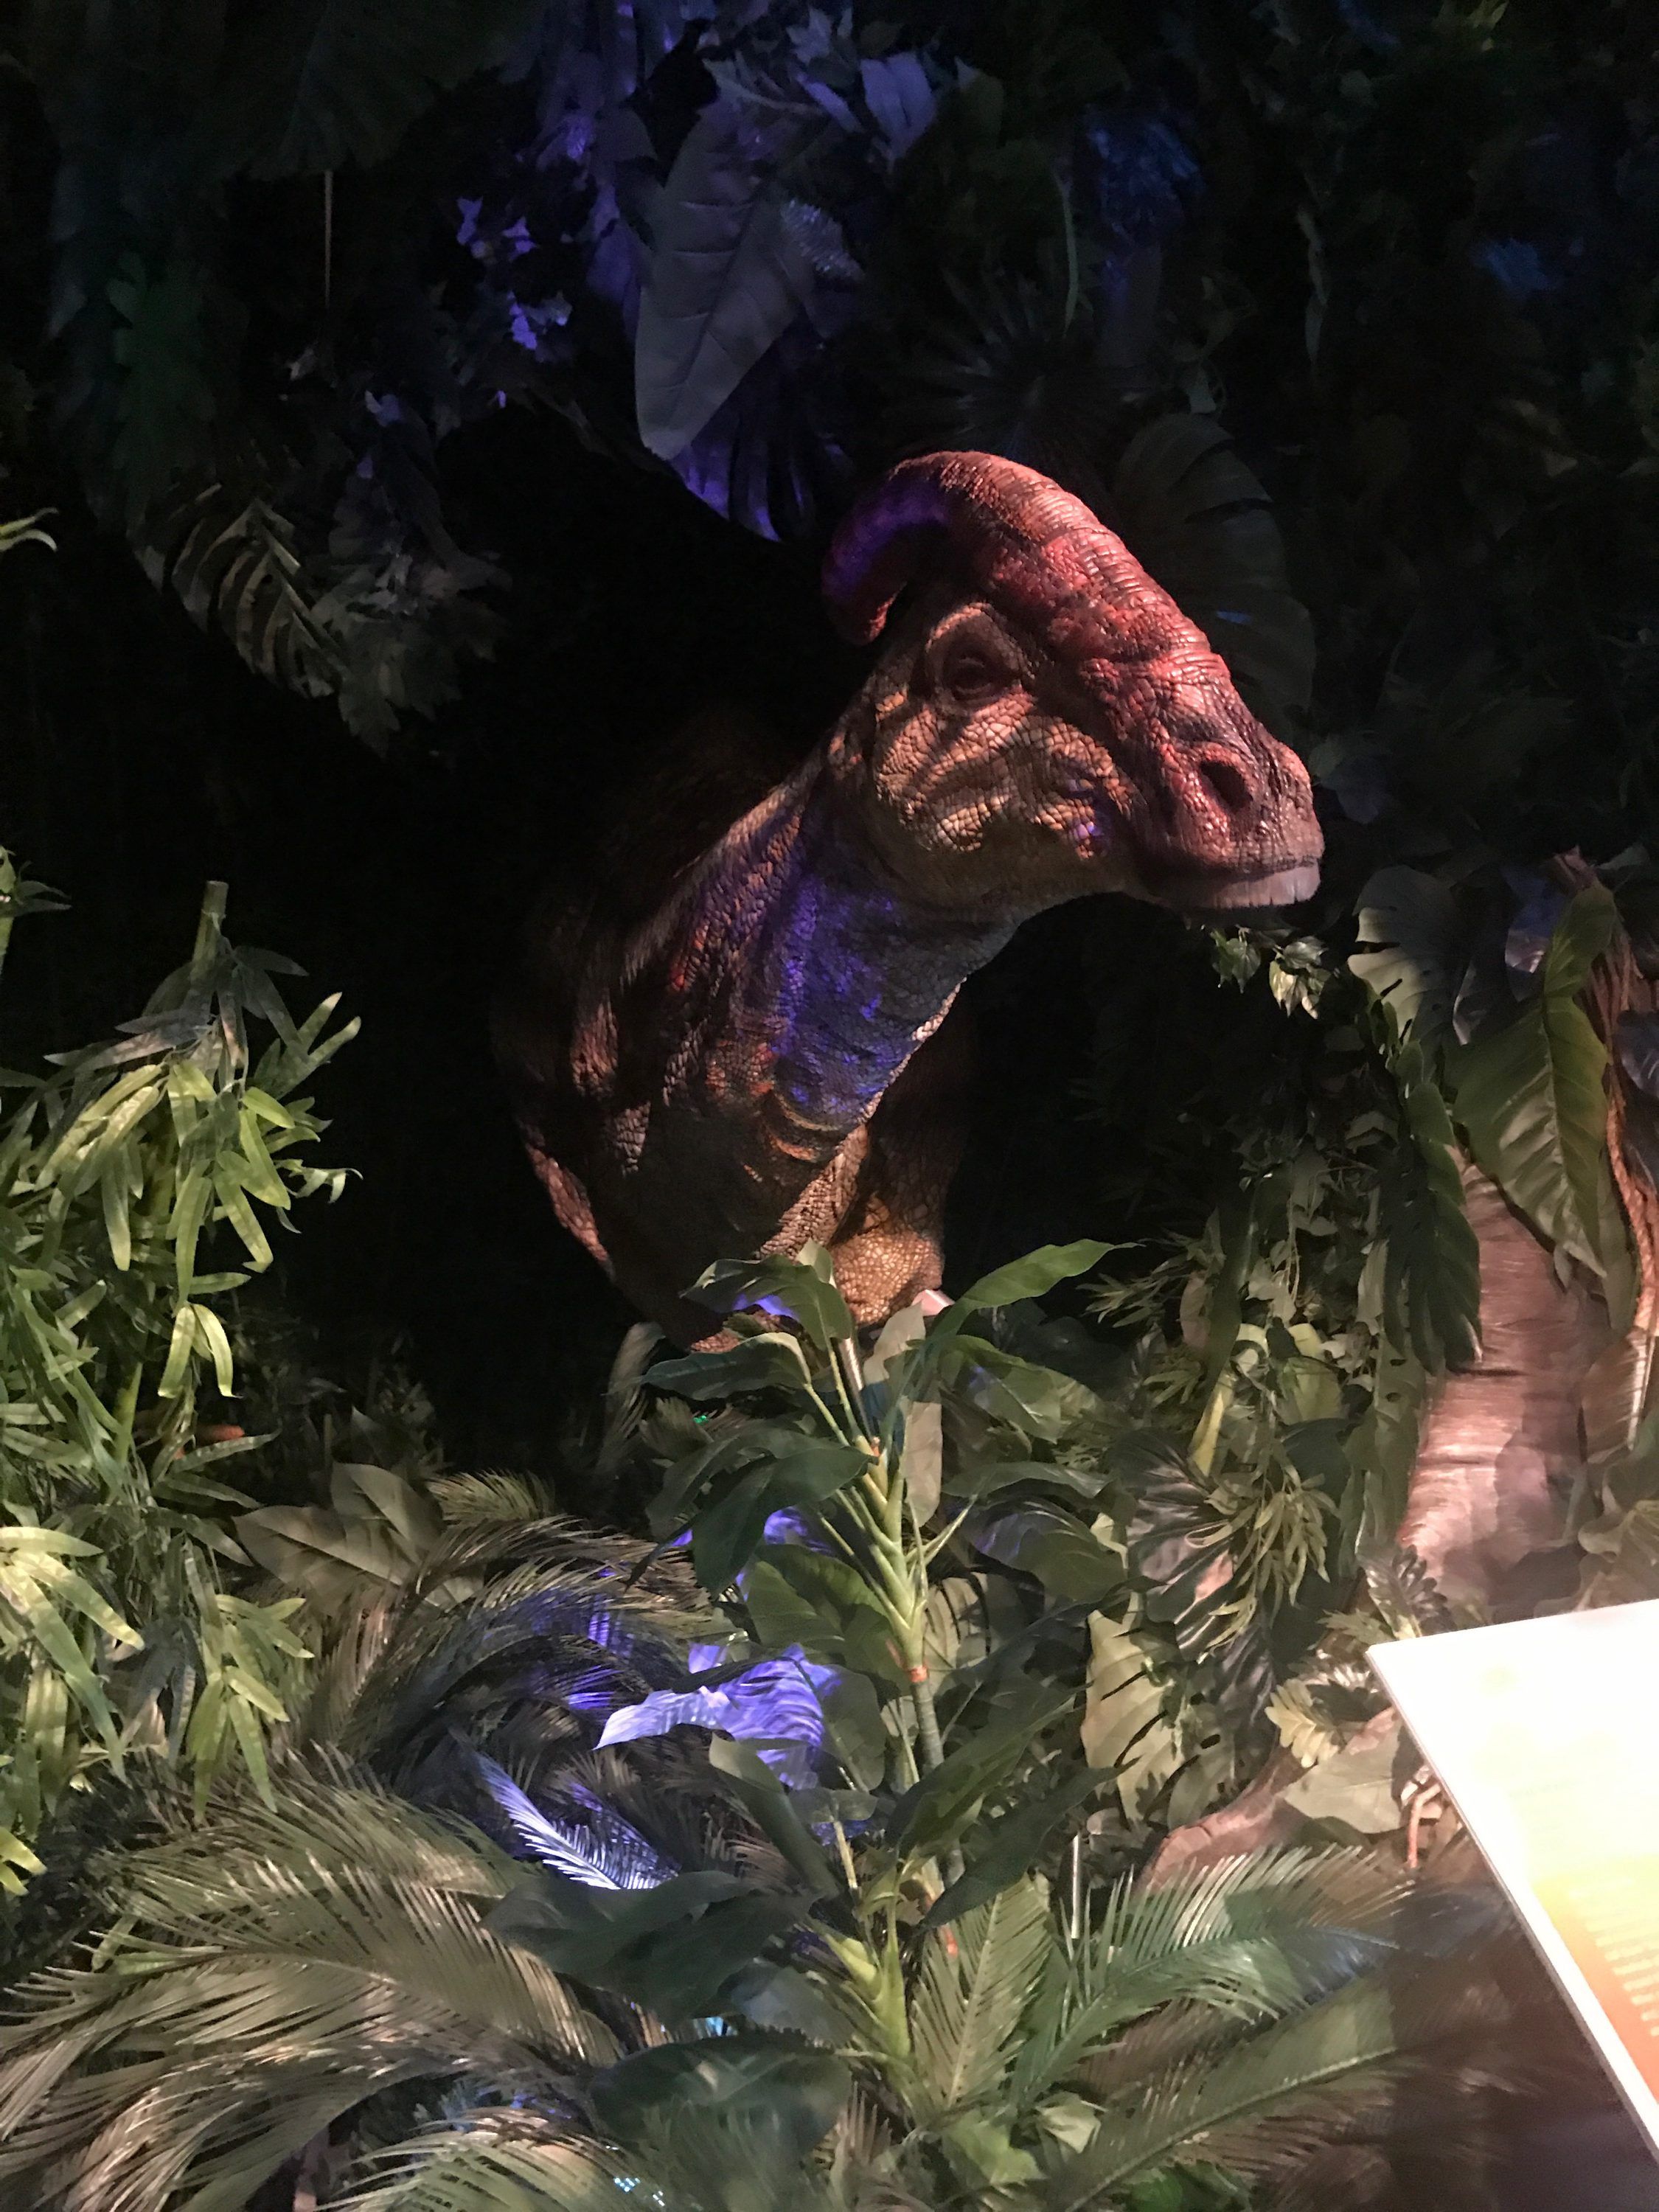 An animatronic parasaurolophus greets guests as they enter the Jurassic World exhibit. Photo by Laura Sansom.